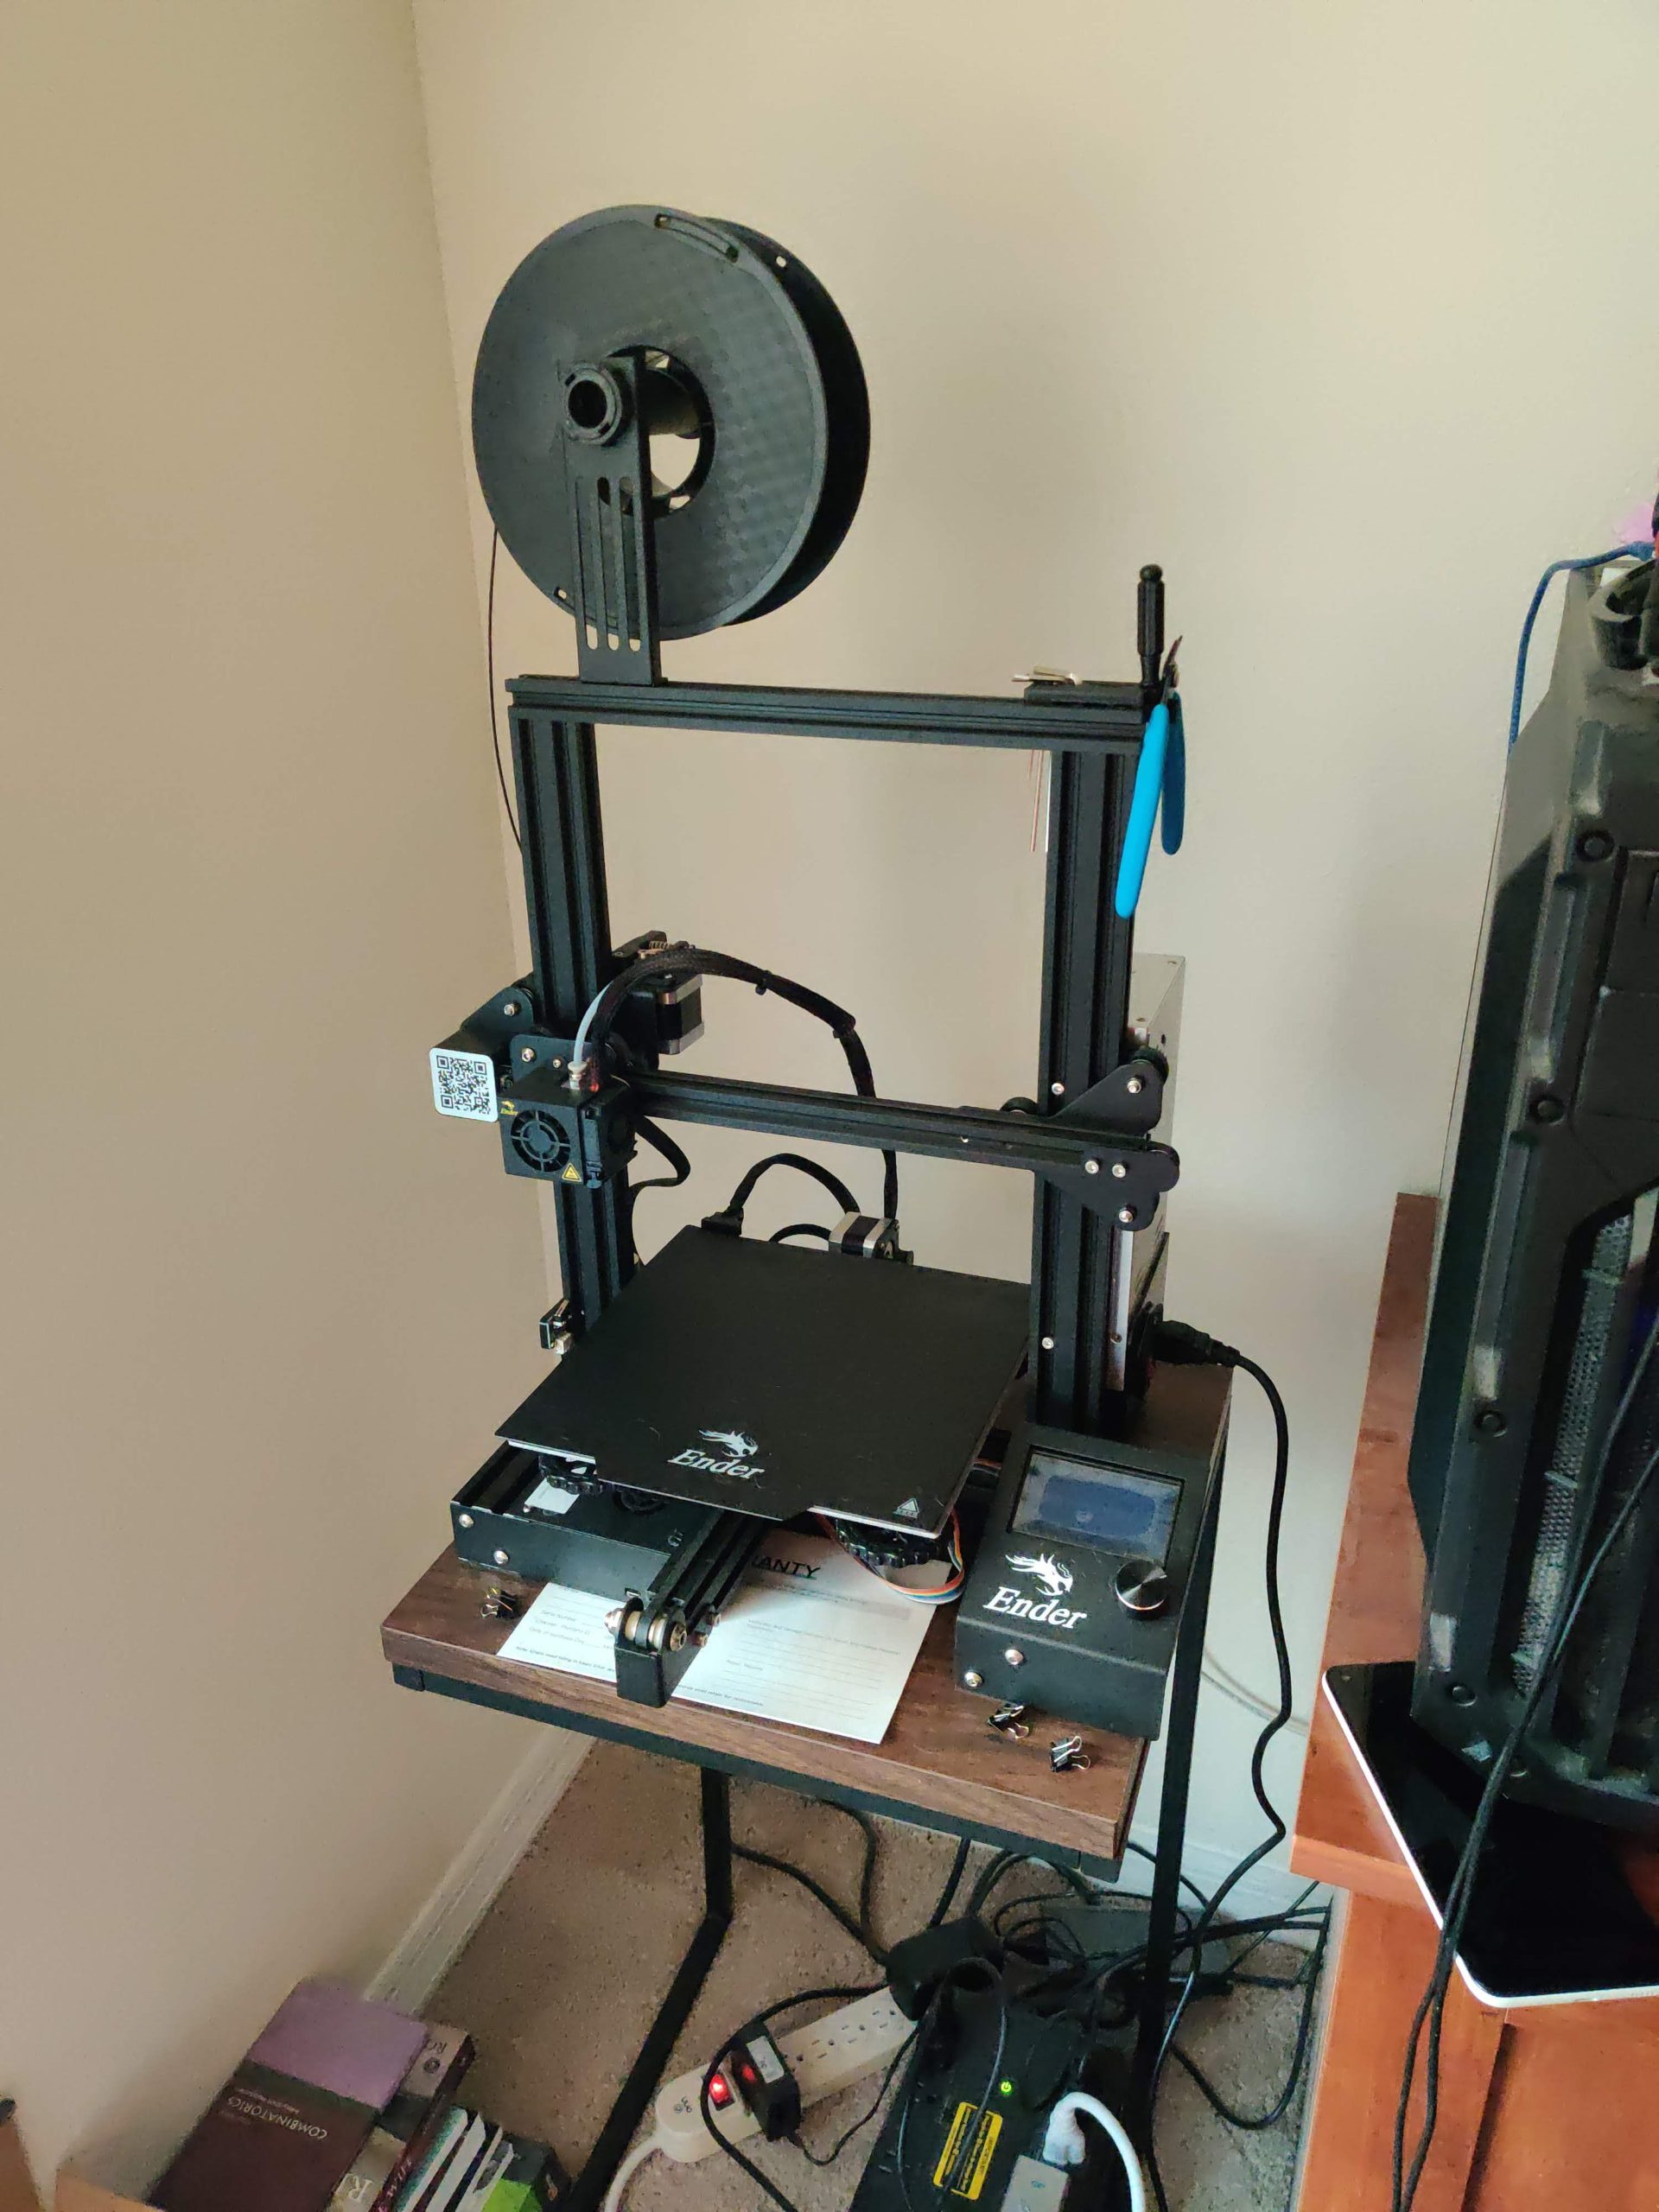 3D Printer Mistakes: Things I Wish I Knew 6 Months Ago